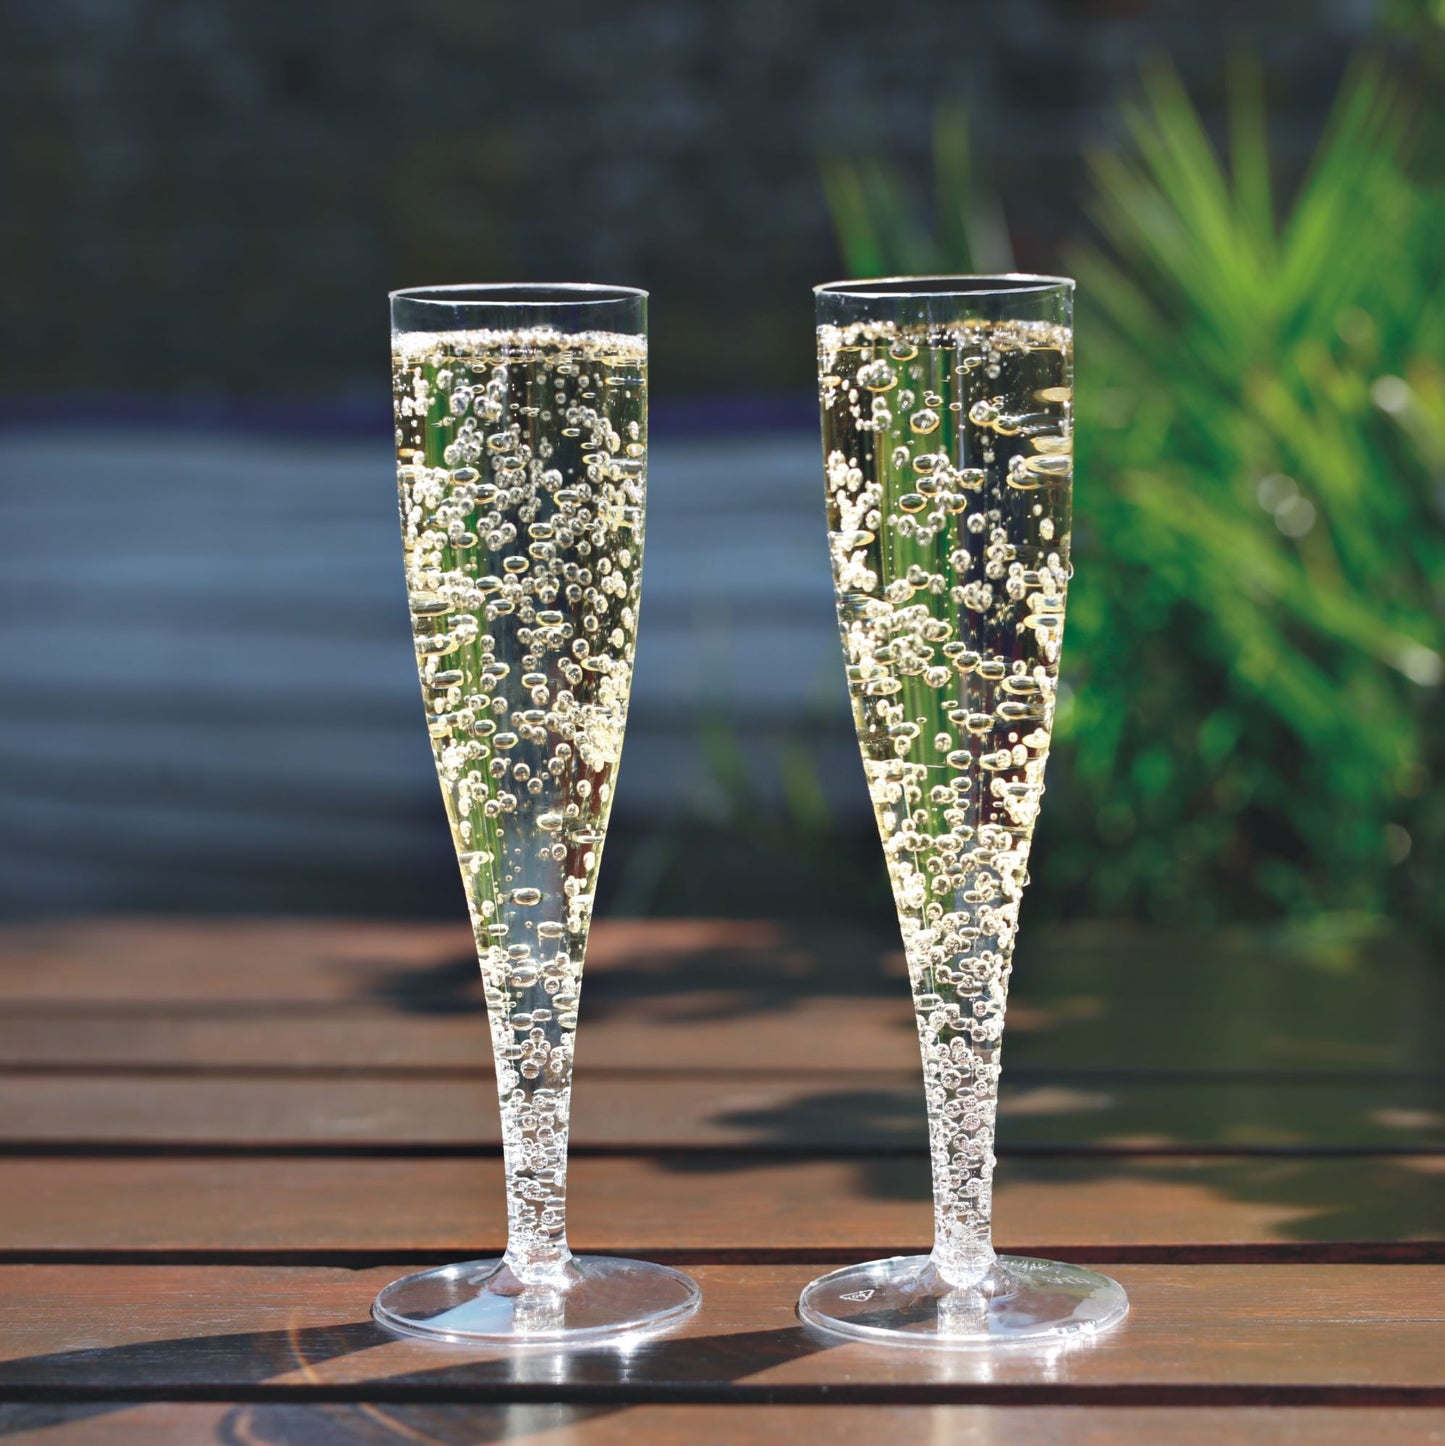 100 x Disposable Clear Prosecco Flutes 135ml 4.75oz Recyclable Polystyrene Material Transparent 1-Piece Sturdy Champagne Glasses BBQs Picnics